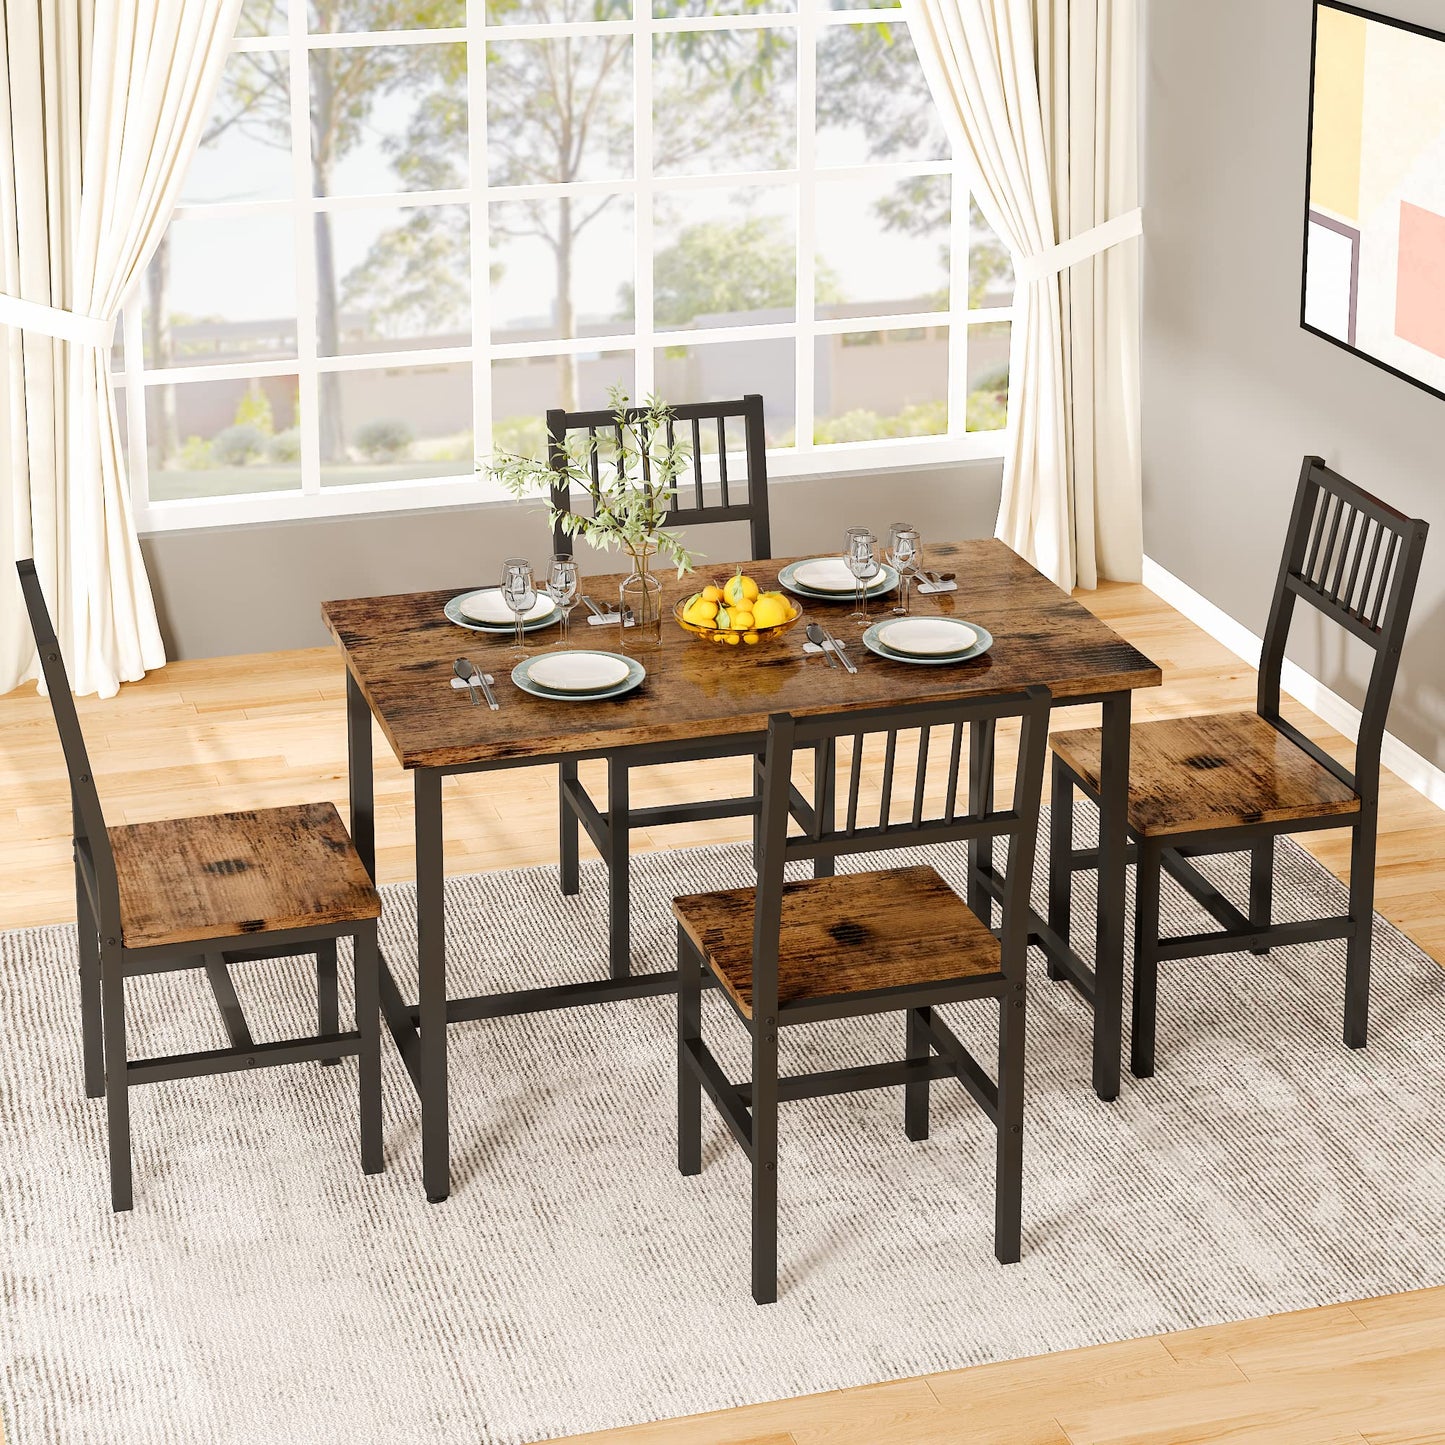 AWQM 5 Pieces Dining Table Set, Industrial Dining Table and Chairs for 4, Metal Frame with Wood Top, Kitchen Table Set for Dining Room, Breakfast Nook, Small Space, Rustic Brown